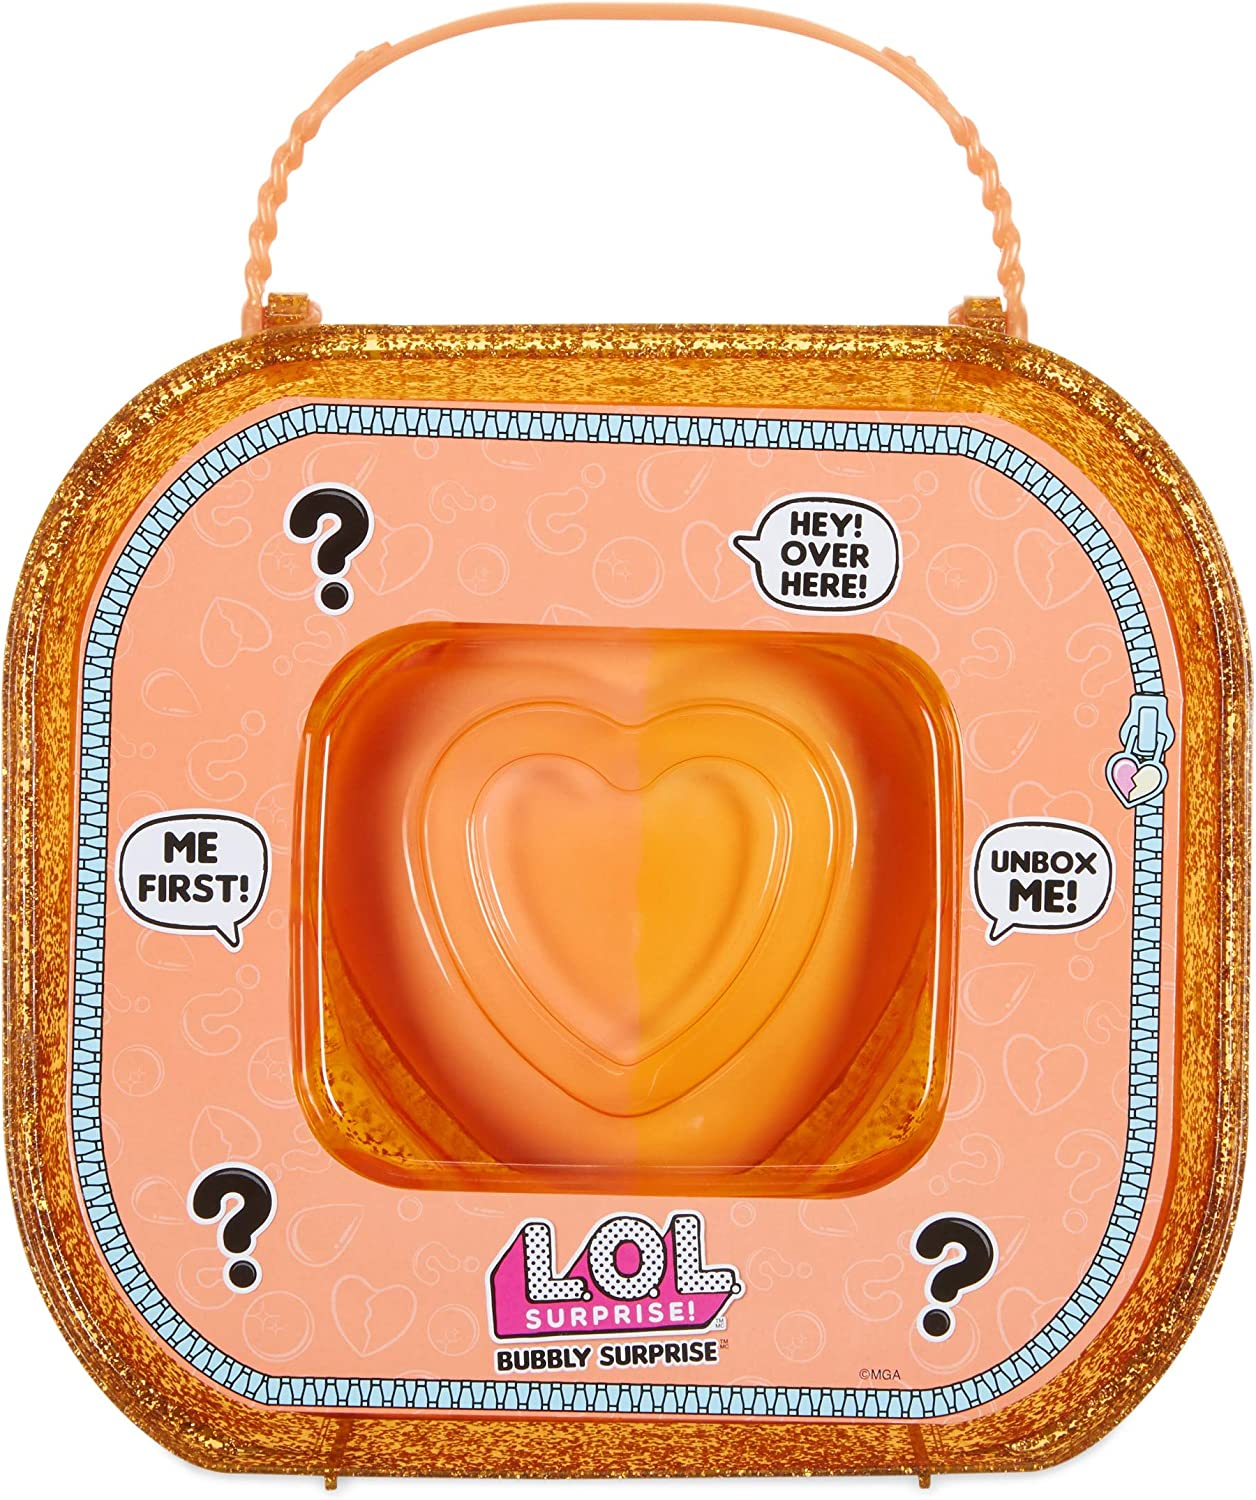 LOL Surprise Bubbly Surprise (Orange) With Exclusive Doll and Pet, Great Gift for Kids Ages 4 5 6+ - image 3 of 7